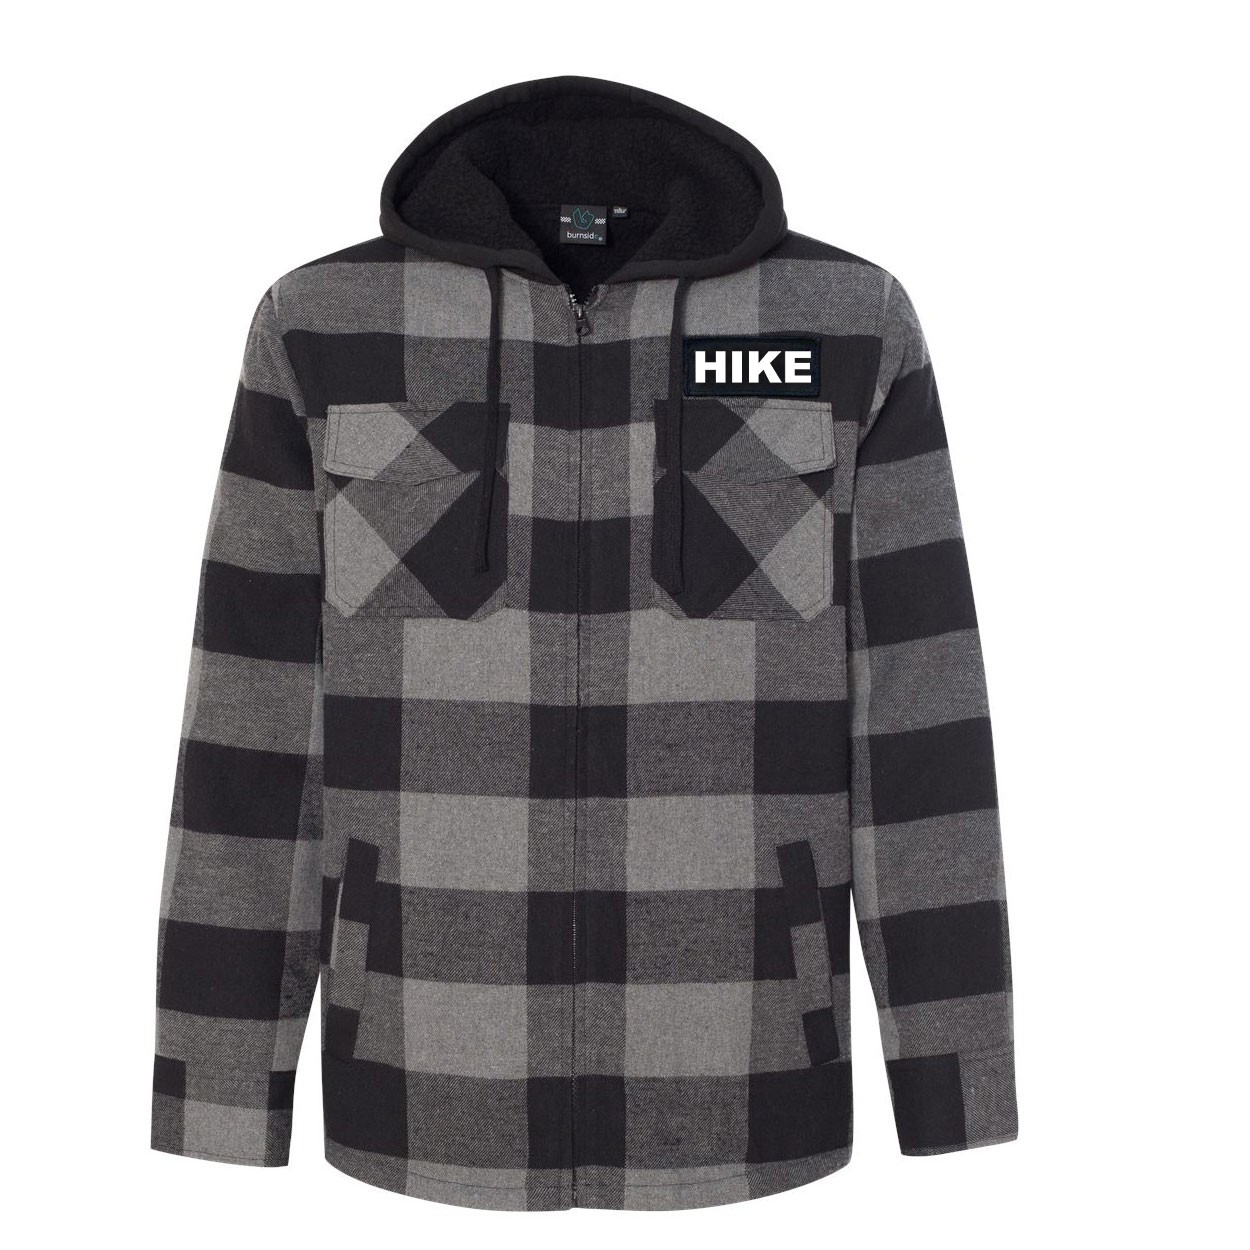 Hike Brand Logo Classic Unisex Full Zip Woven Patch Hooded Flannel Jacket Black/Gray